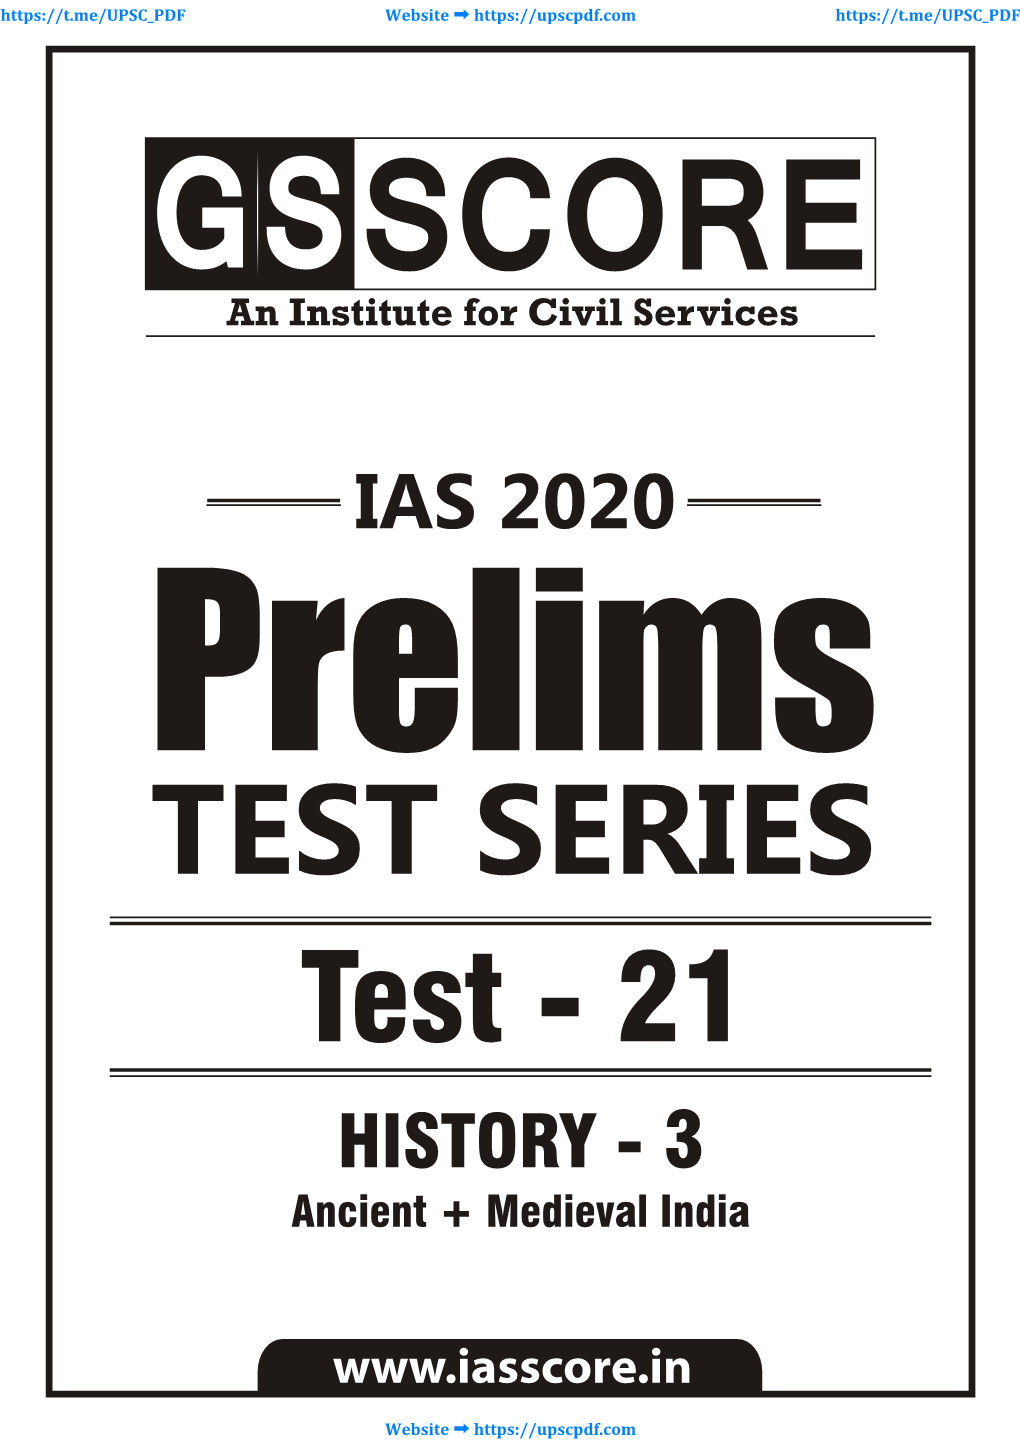 IAS 2020 Prelims TEST SERIES Test - 21 HISTORY - 3 Ancient + Medieval India